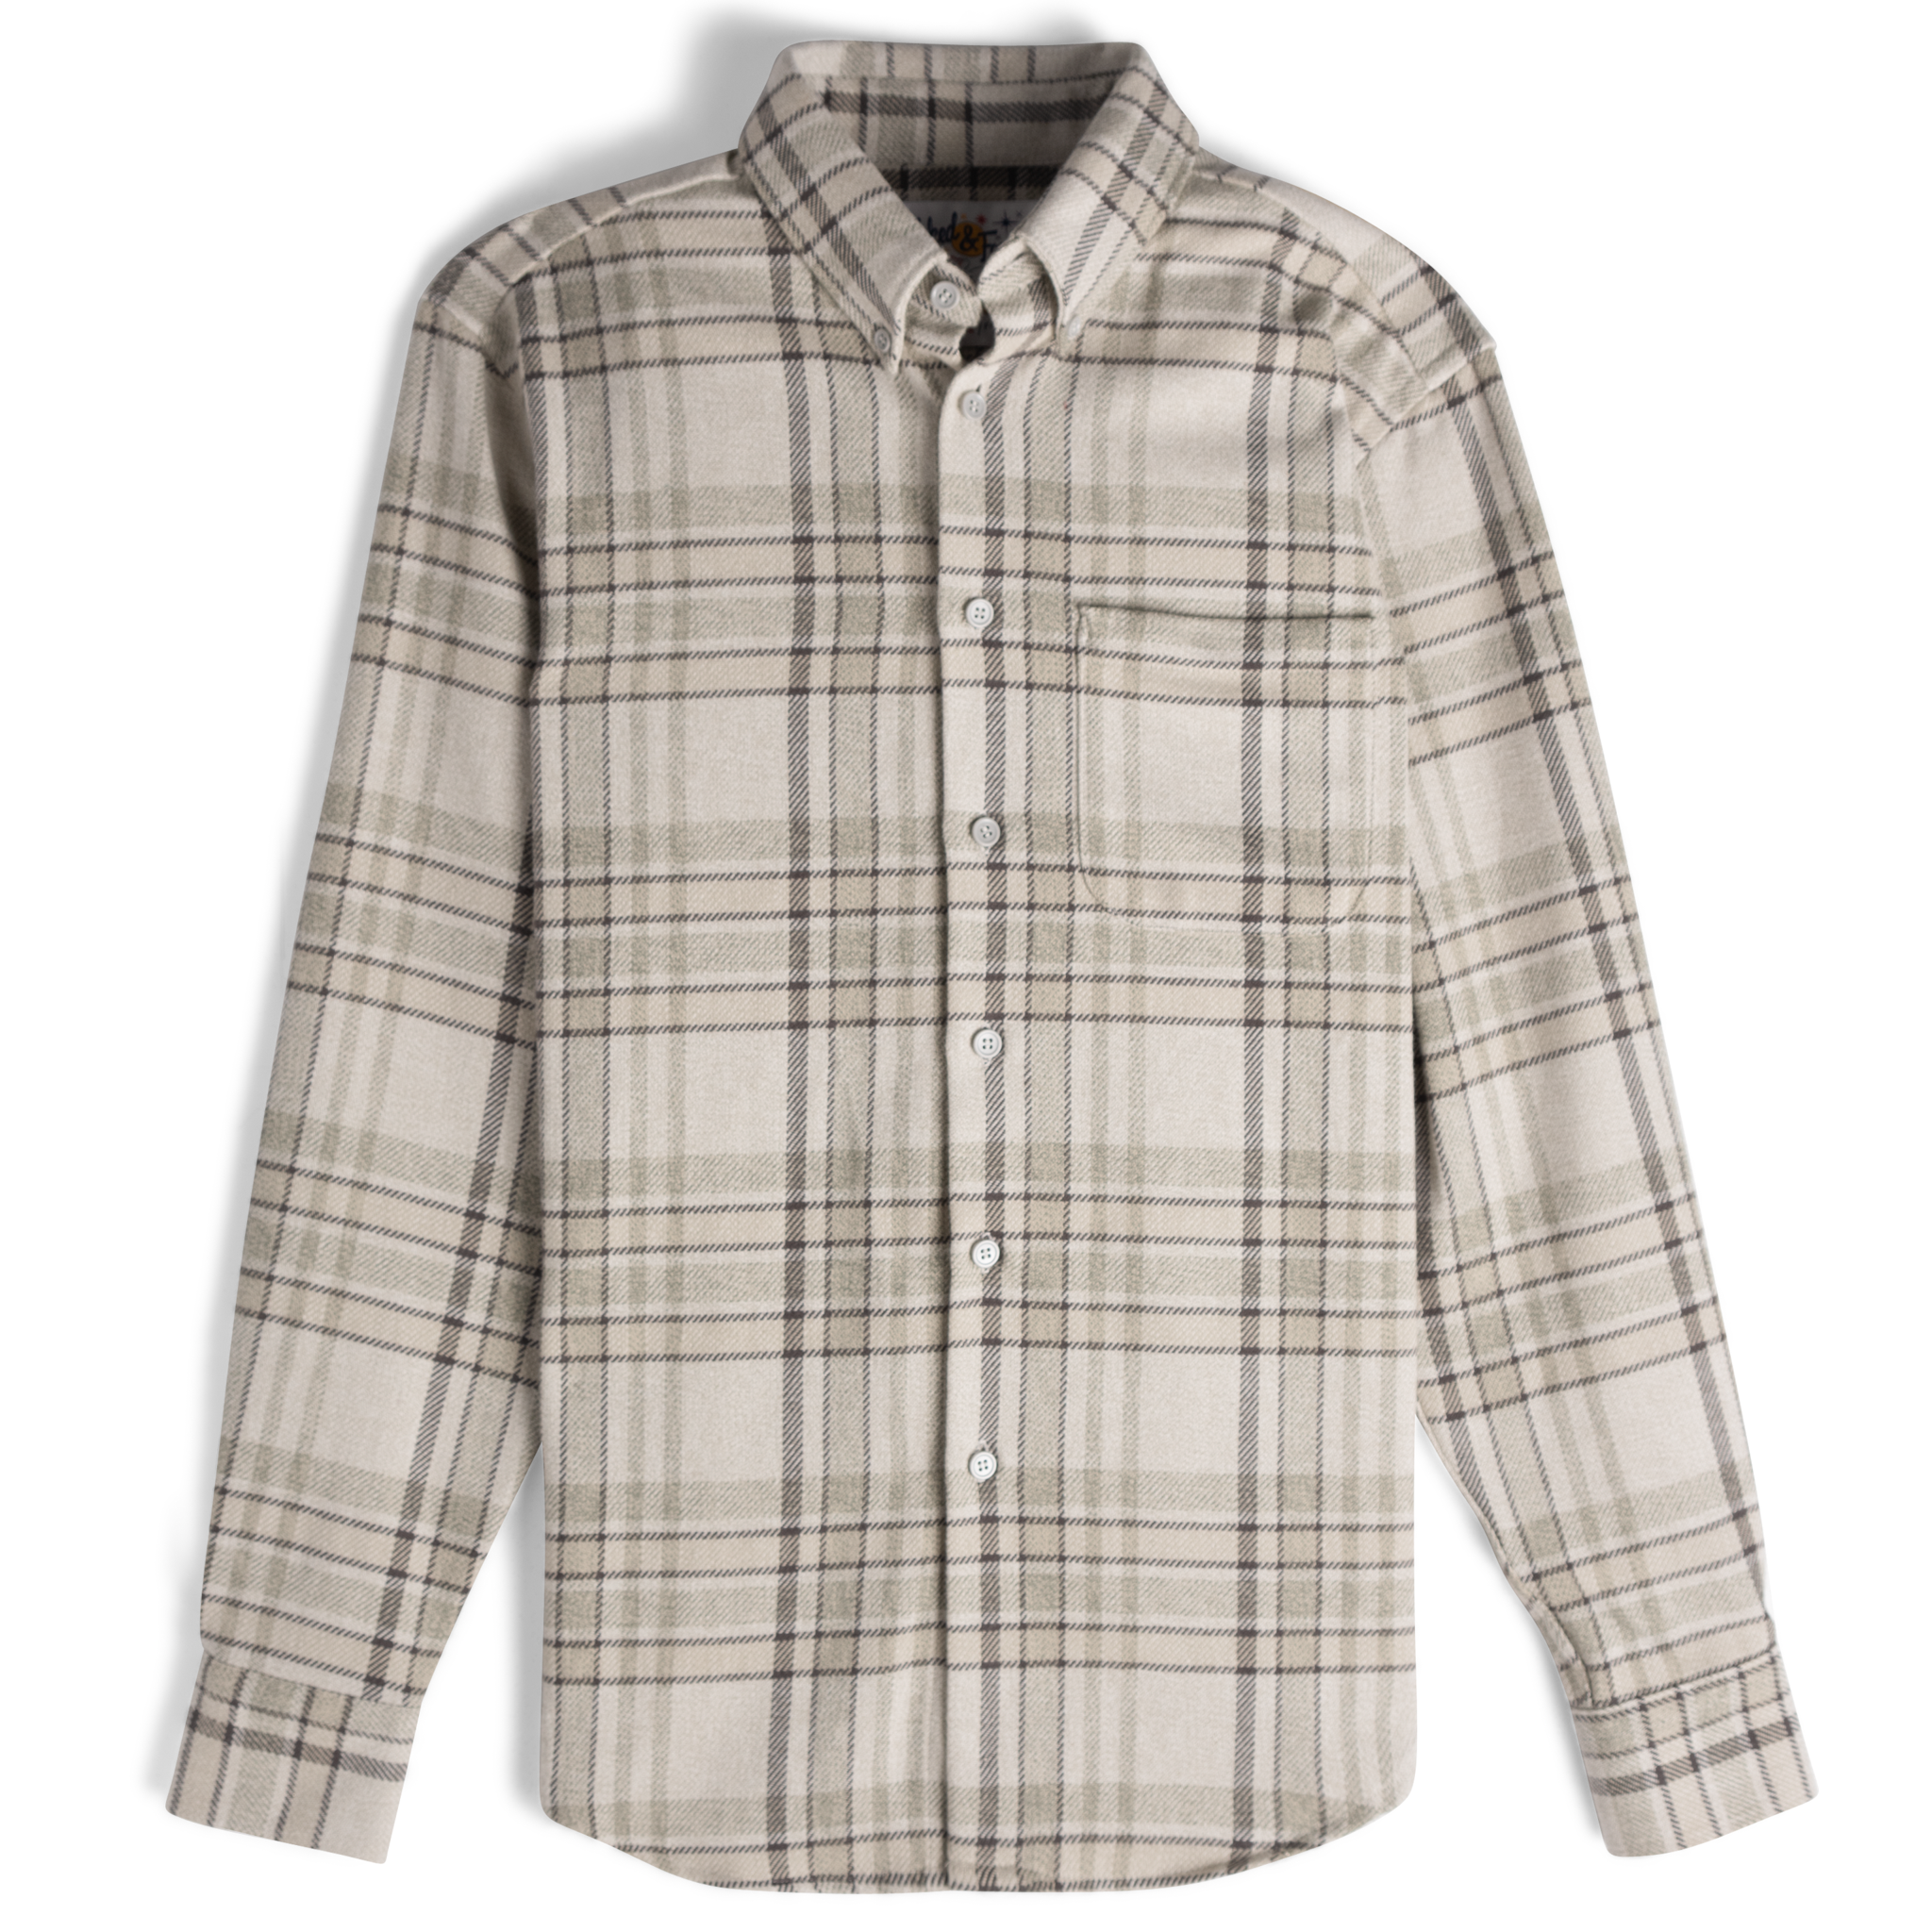  Easy Shirt - Heavy Vintage Flannel - Pale Grey - flat front   